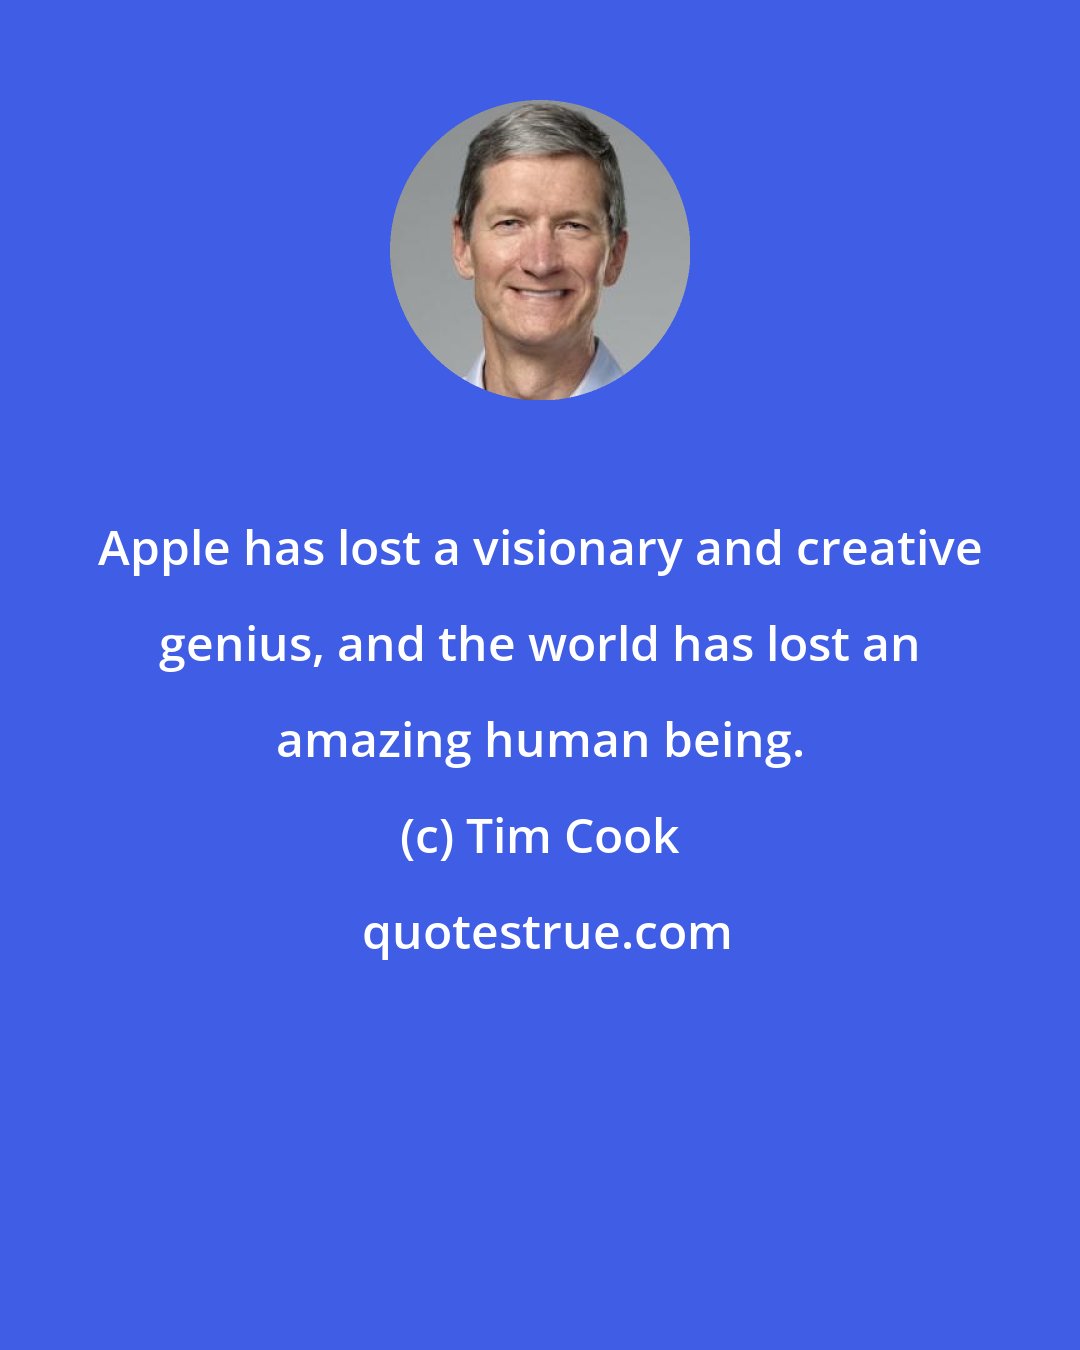 Tim Cook: Apple has lost a visionary and creative genius, and the world has lost an amazing human being.